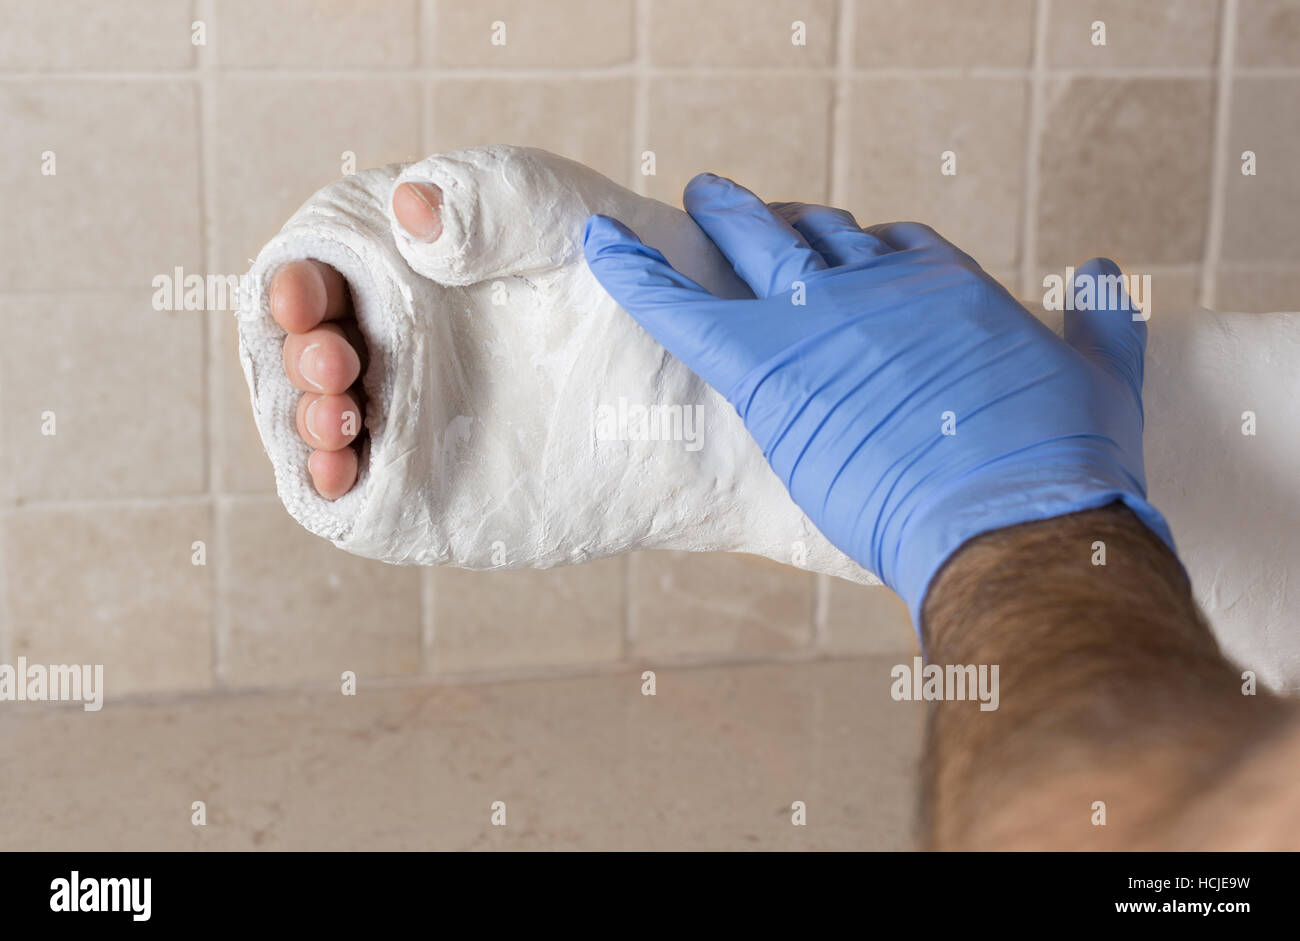 Orthopedic technician putting on a fiberglass / plaster cast on a young man's broken and fractured arm after an injury.  Close up image shows the cast Stock Photo